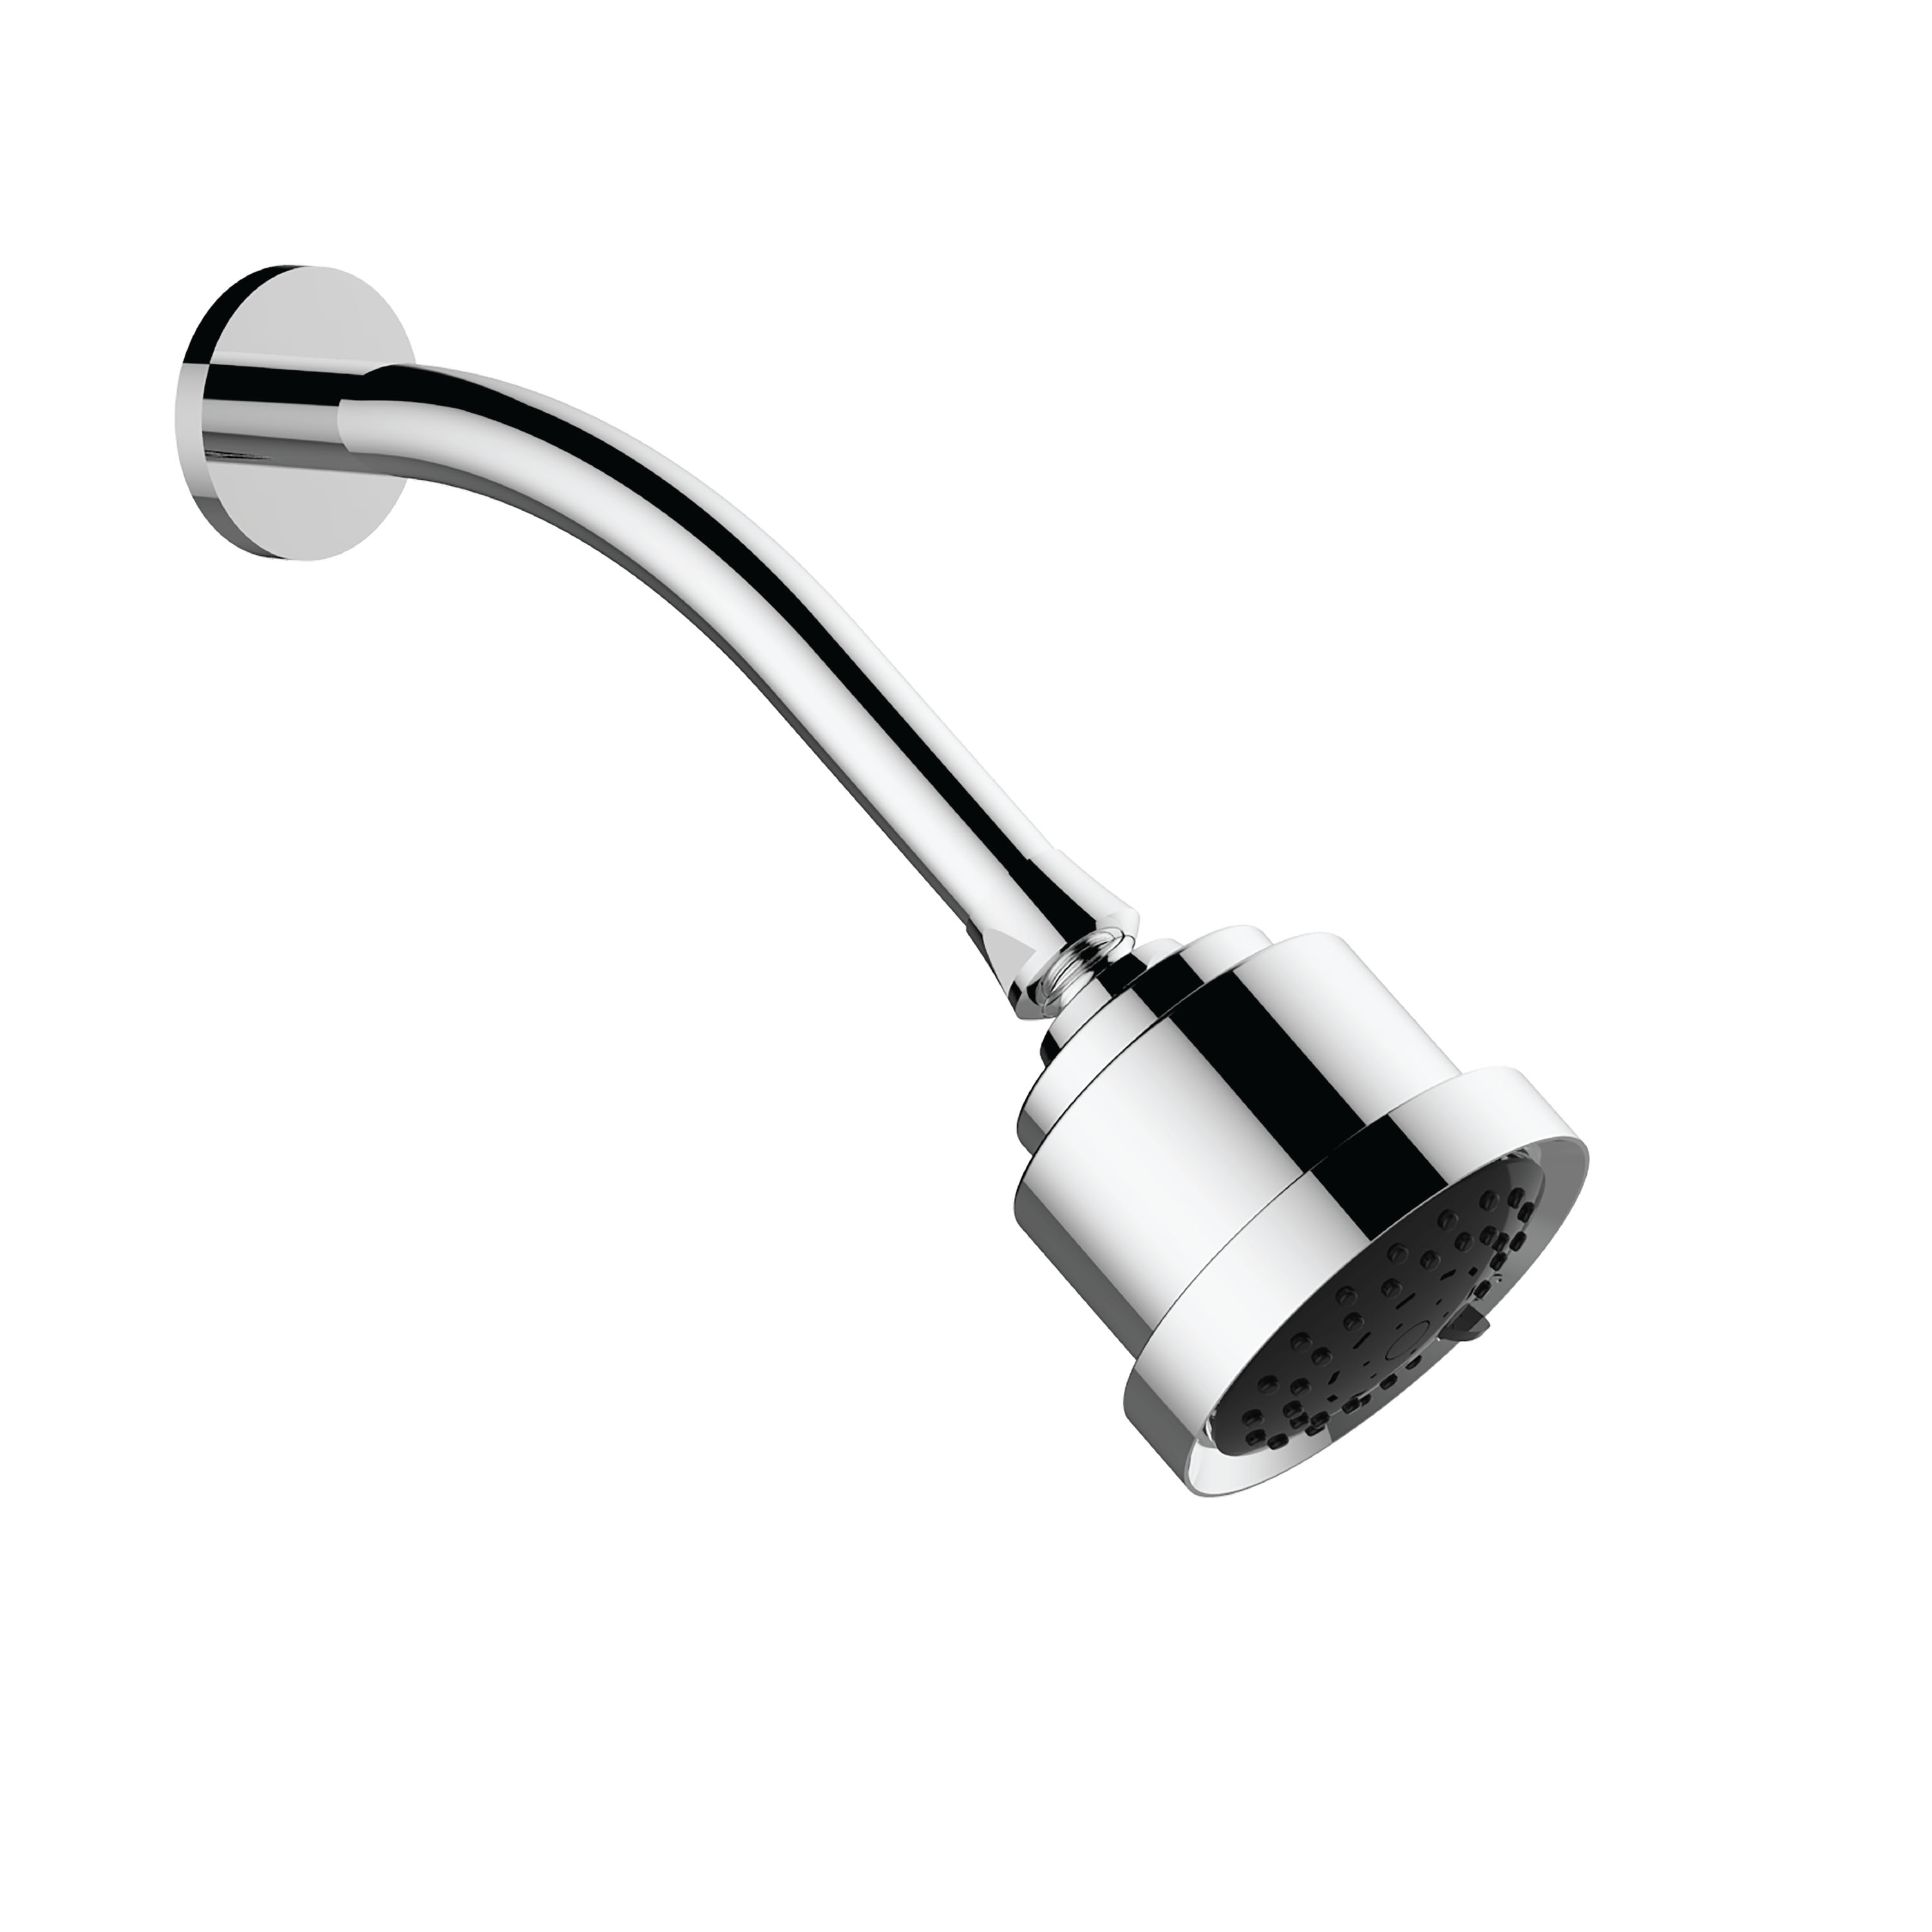 Santec 70854510 Athena Cylindrical Shower Head with Arm and Round Flange - Polished Chrome